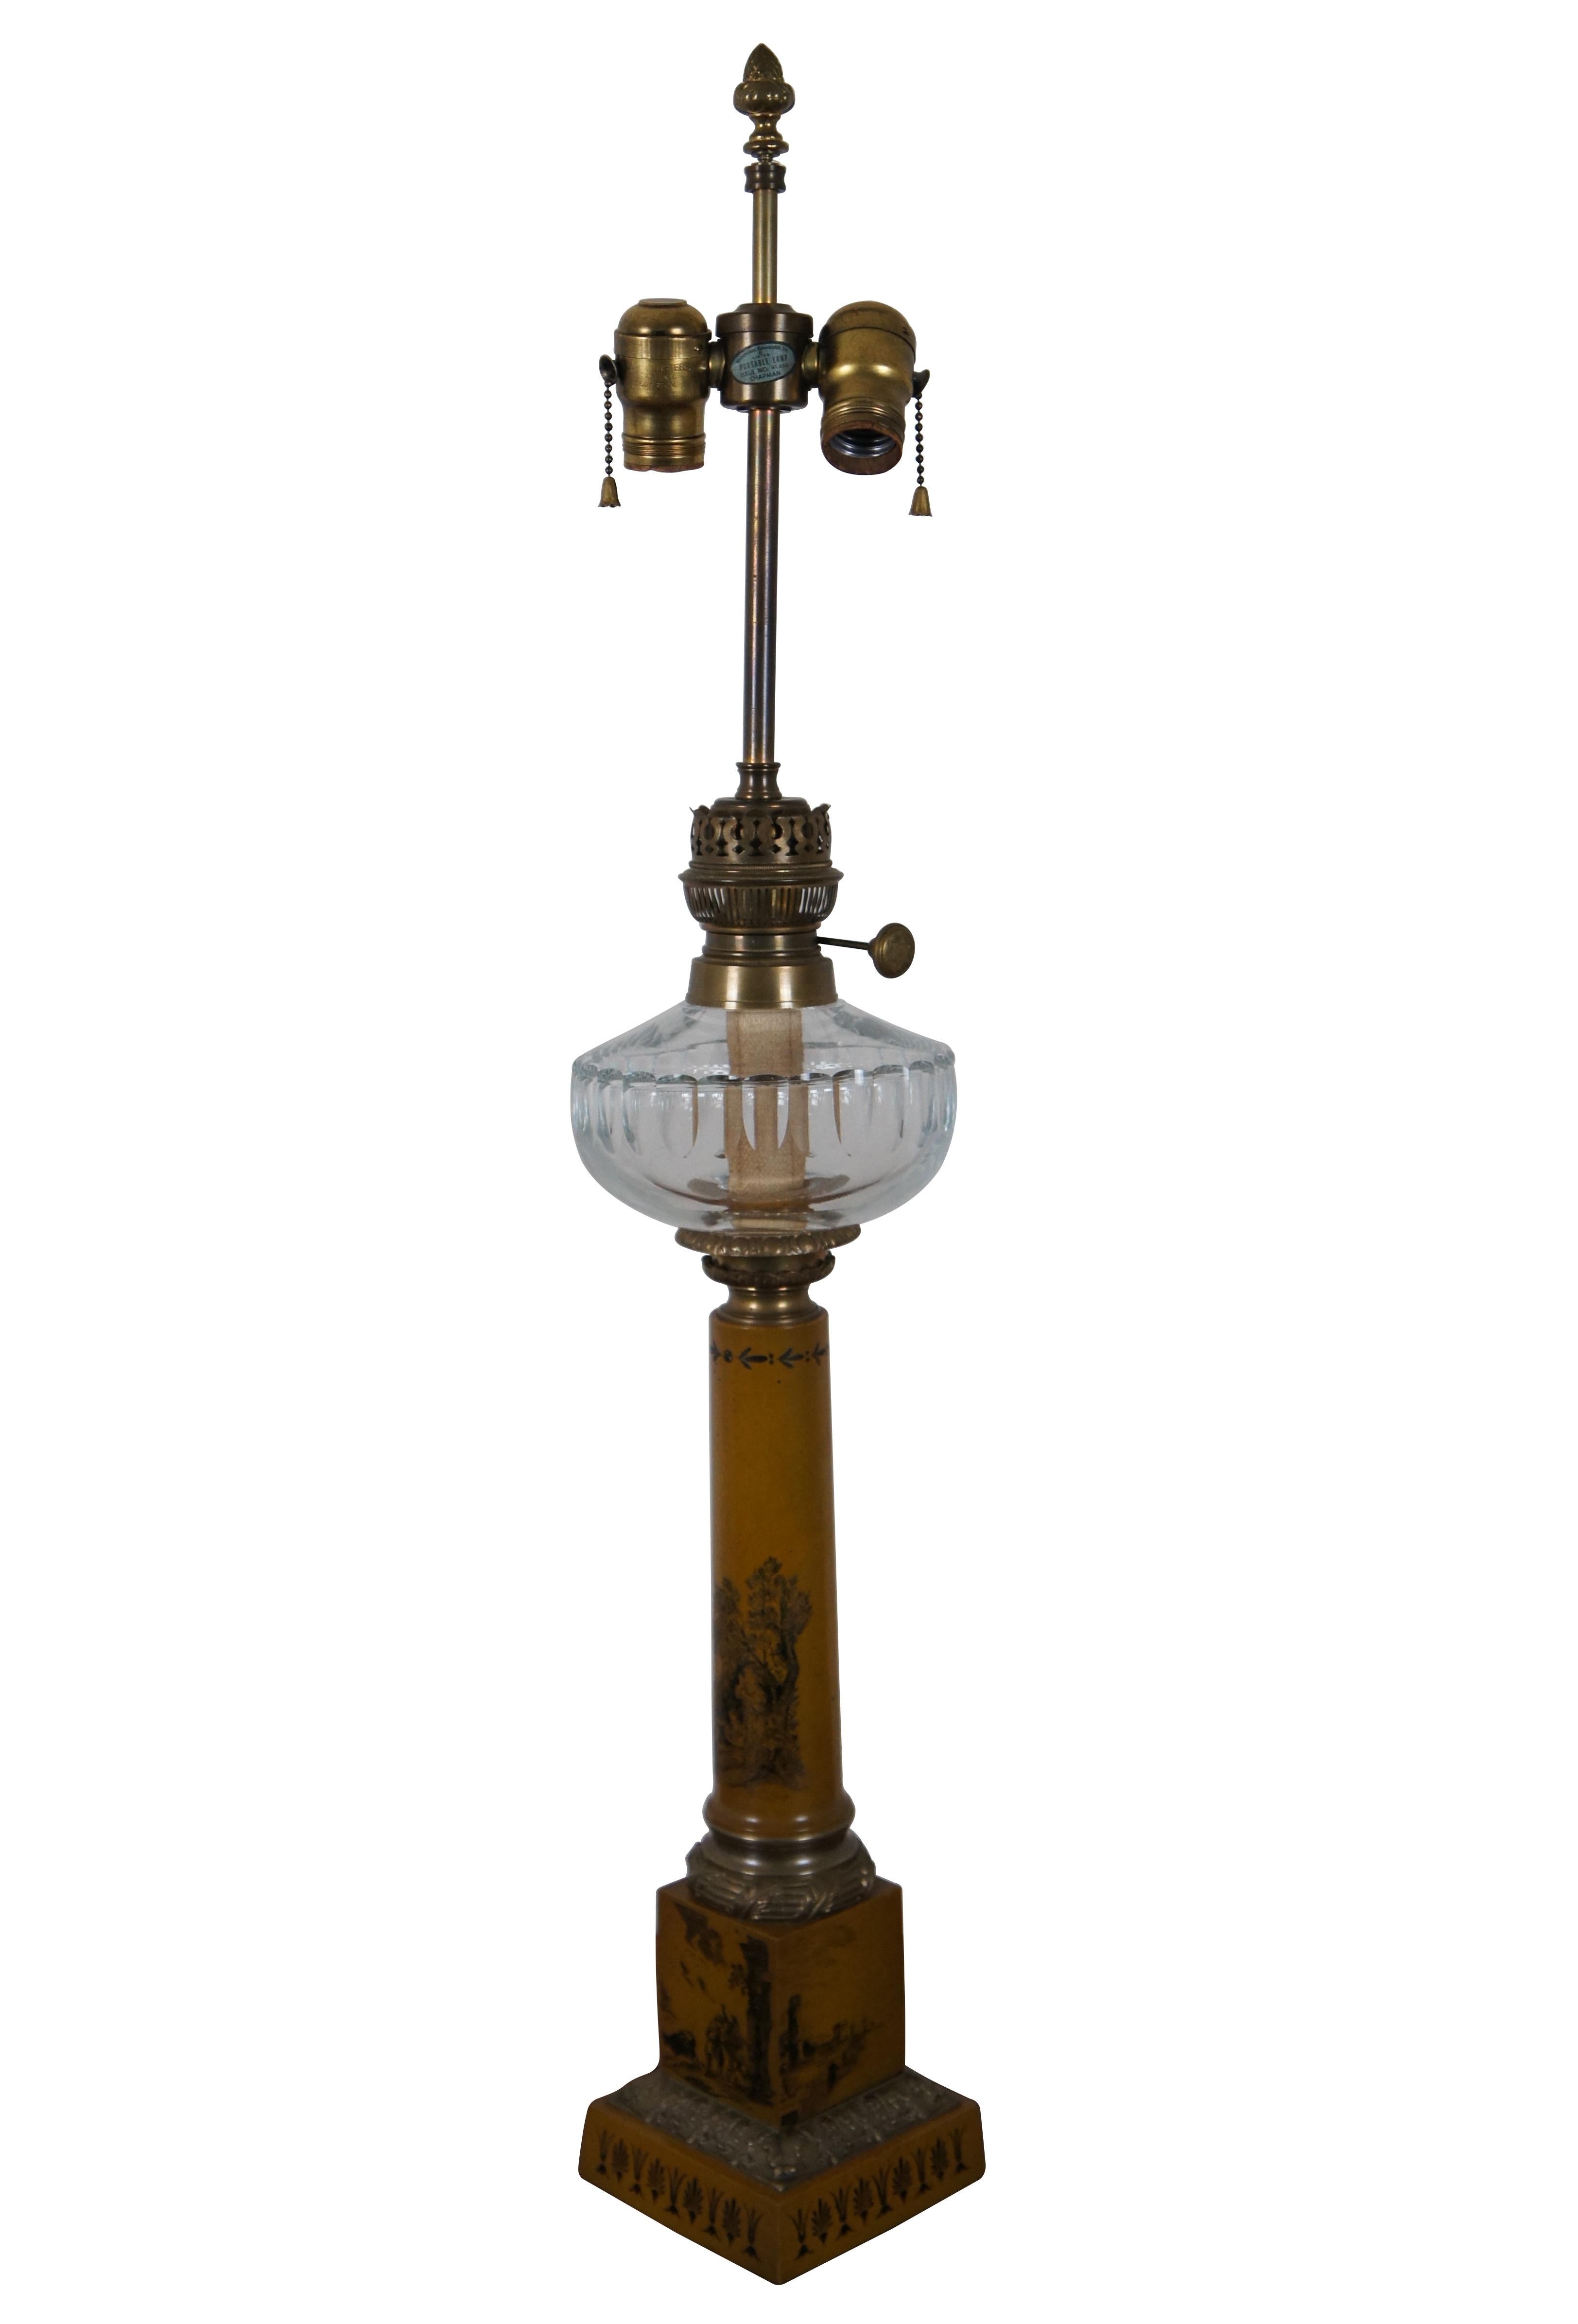 Vintage 20th century converted oil table lamp in the shape of a Italian Neoclassical tole column painted in mustard yellow with toile Provincial scenes / landscapes, trimmed in brass and topped with a clear glass reservoir below the two light